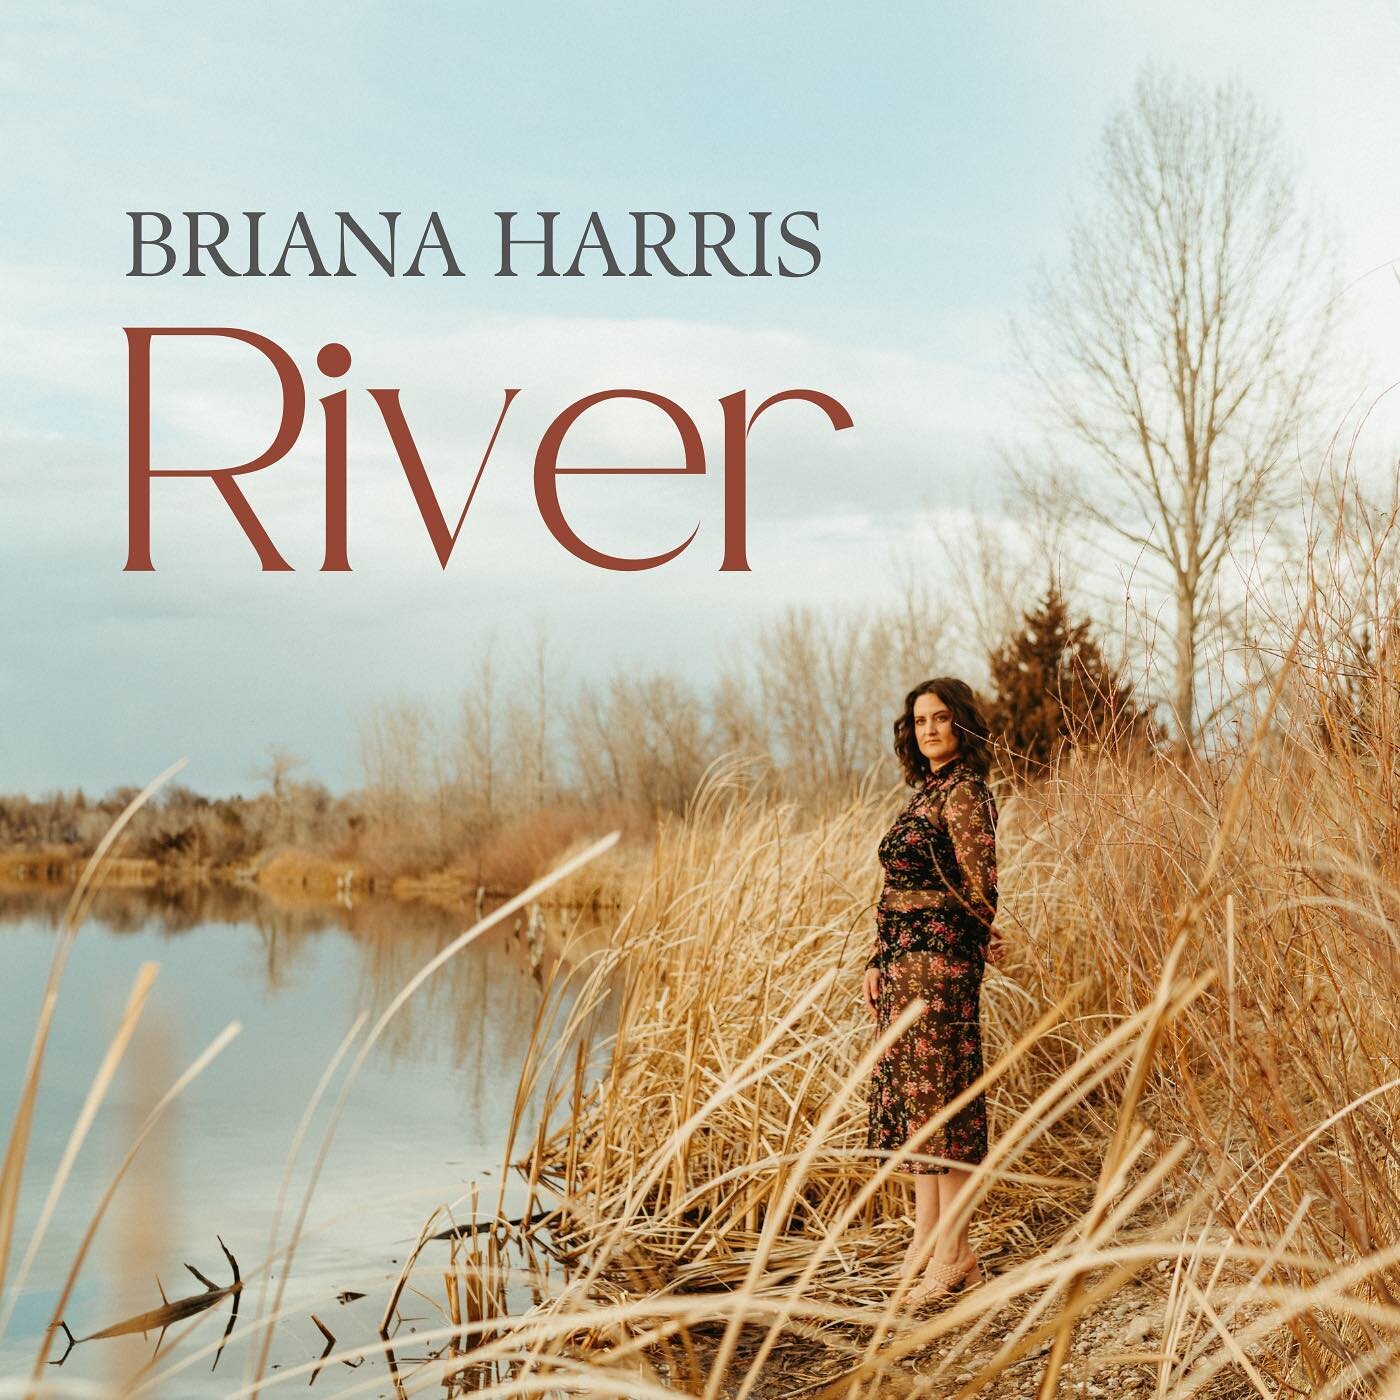 &ldquo;River,&rdquo; the second single from my upcoming album, is out now. It&rsquo;s a haunting folk tune layered with stories of escapism, desire, and defiance. (And I also think it&rsquo;s perfect for fall.)

Let me know if listening inspires a gr